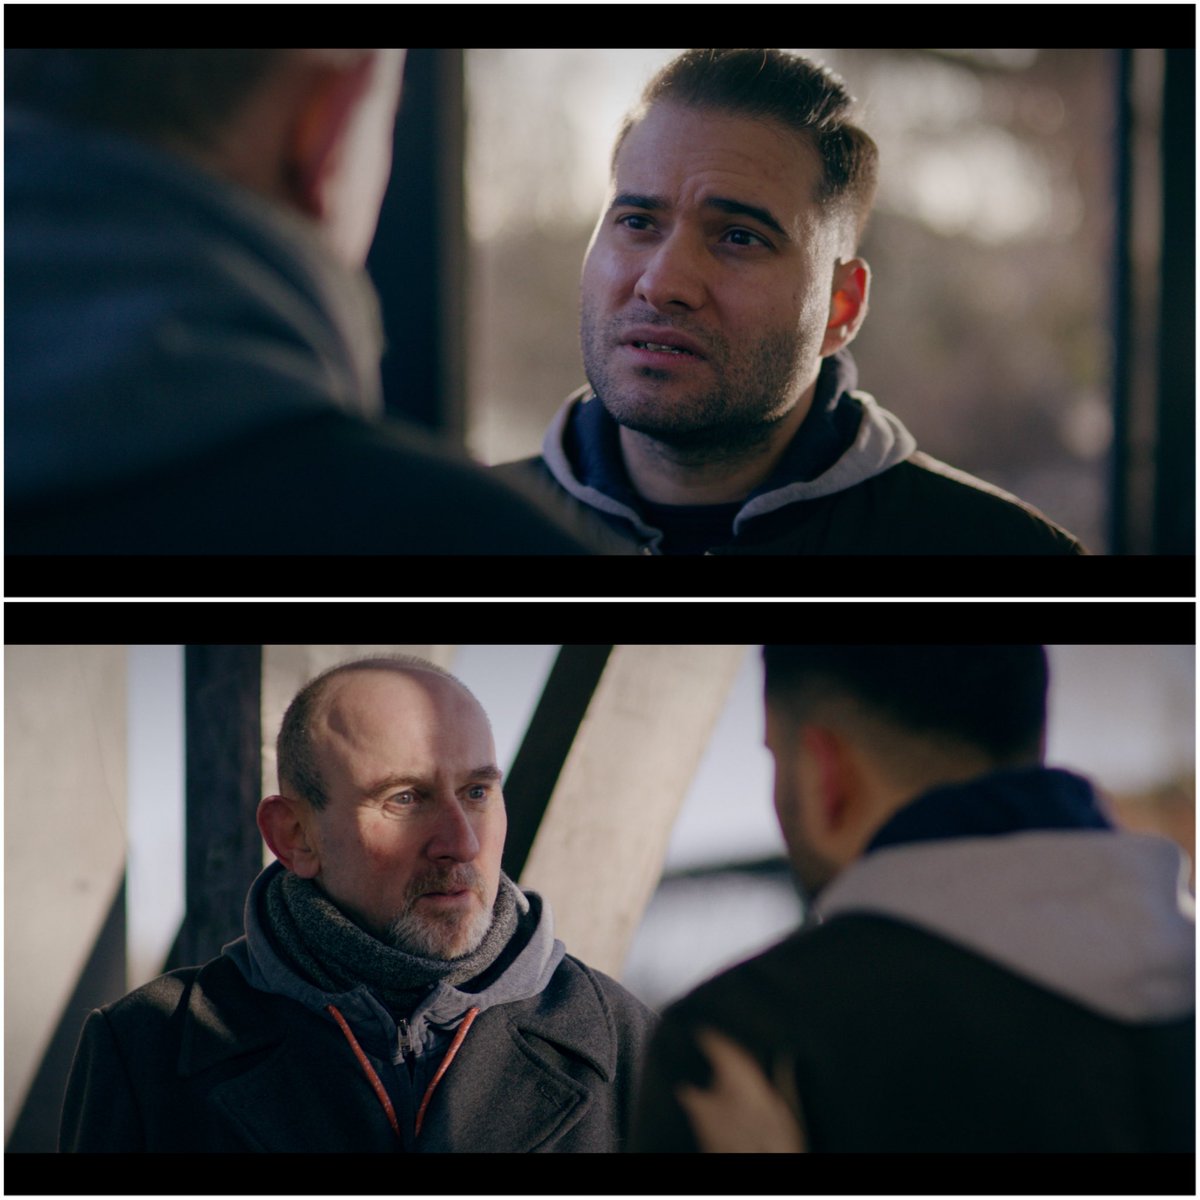 Great work today John, pleasure meeting and working with you - here are a couple of stills! 🎥 🎬